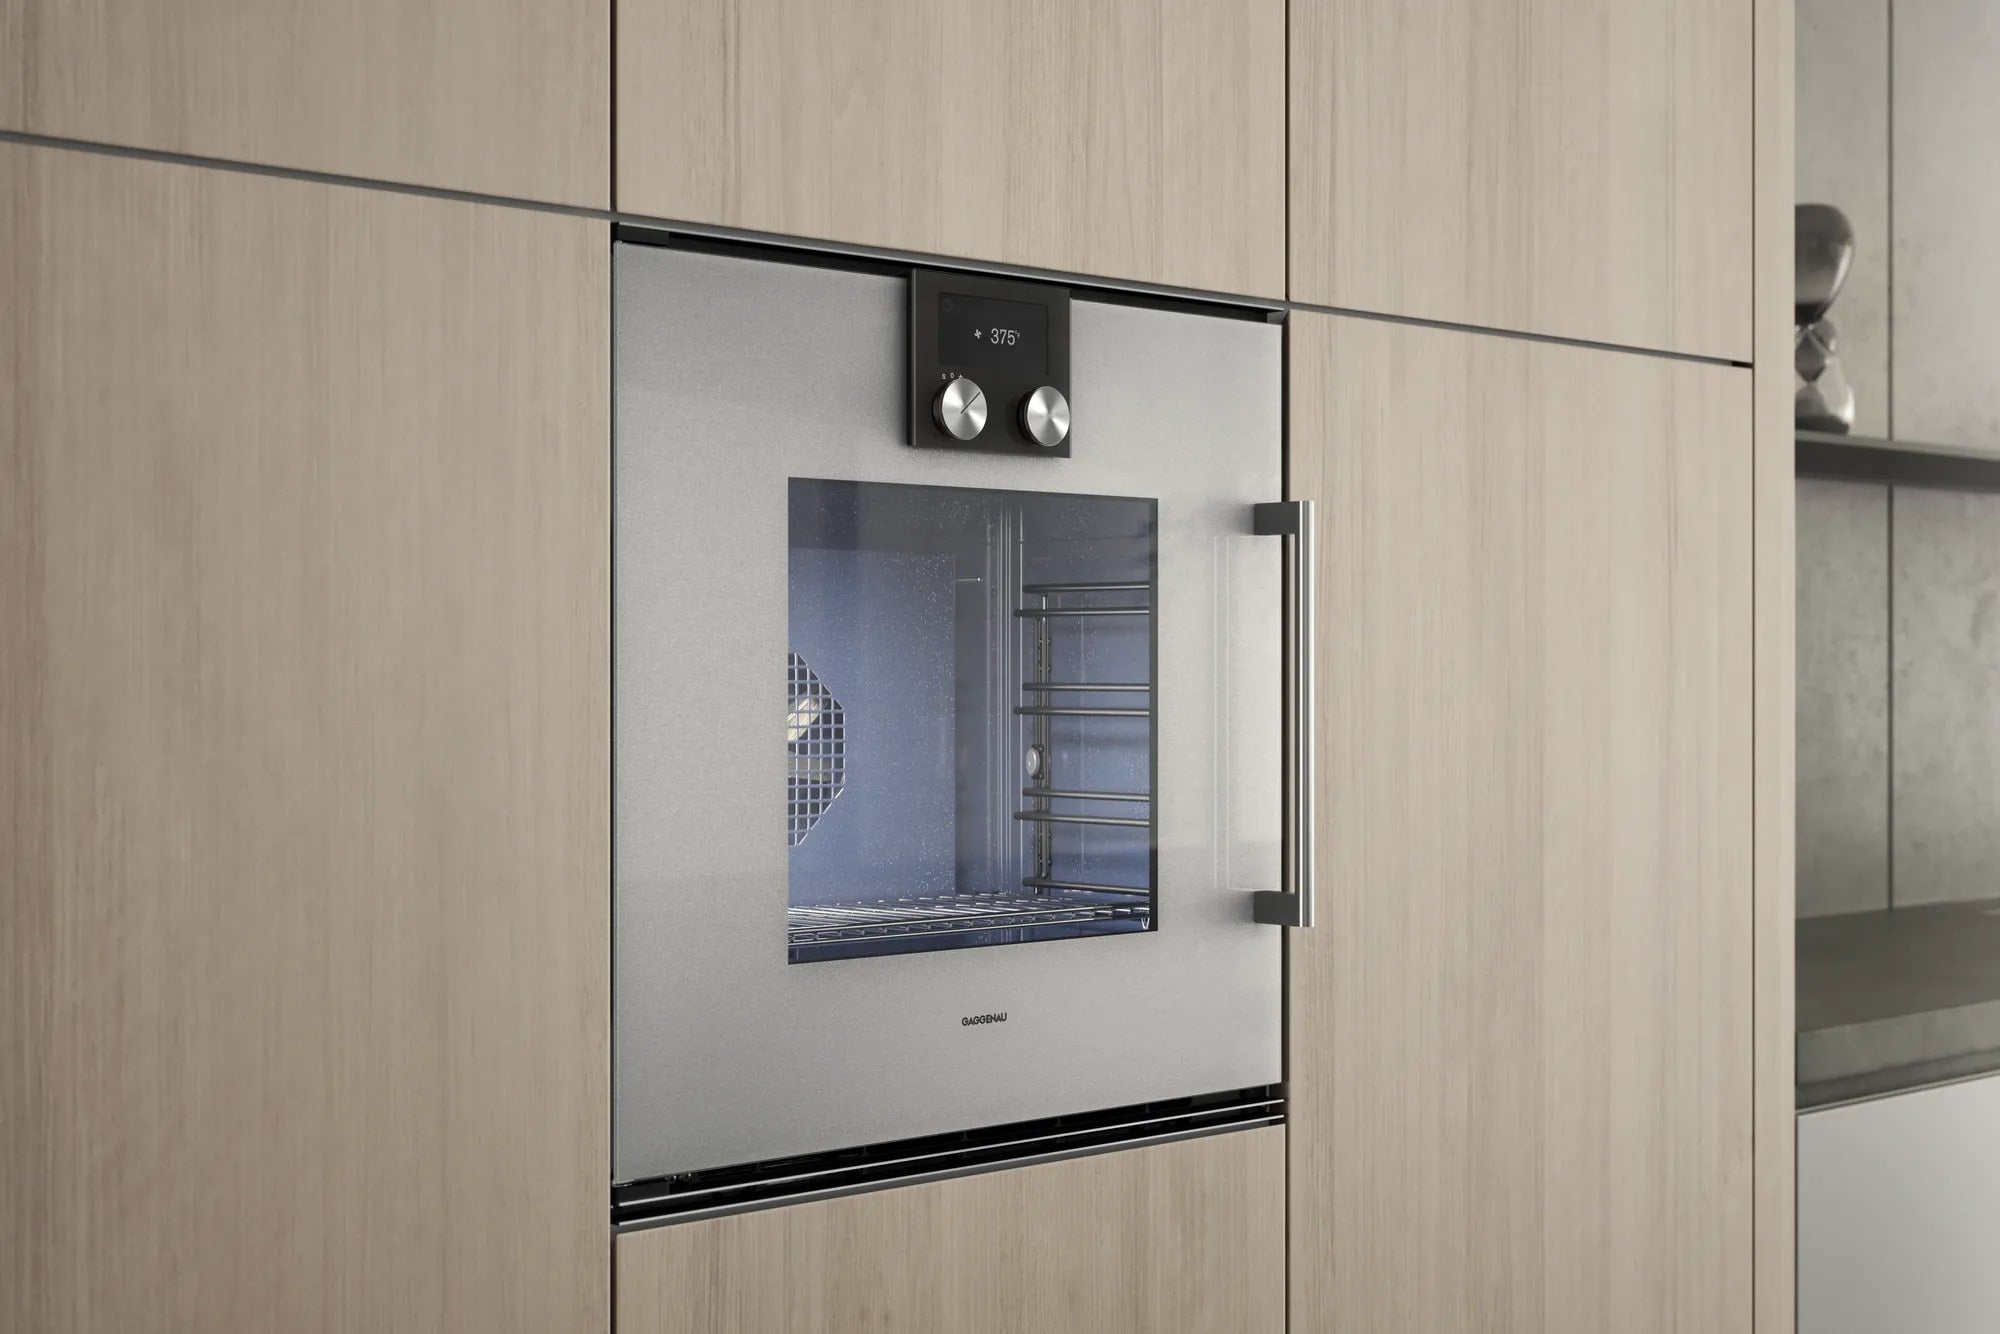 Gaggenau - 3.1 cu. ft Single Wall Oven in Stainless - BOP250612